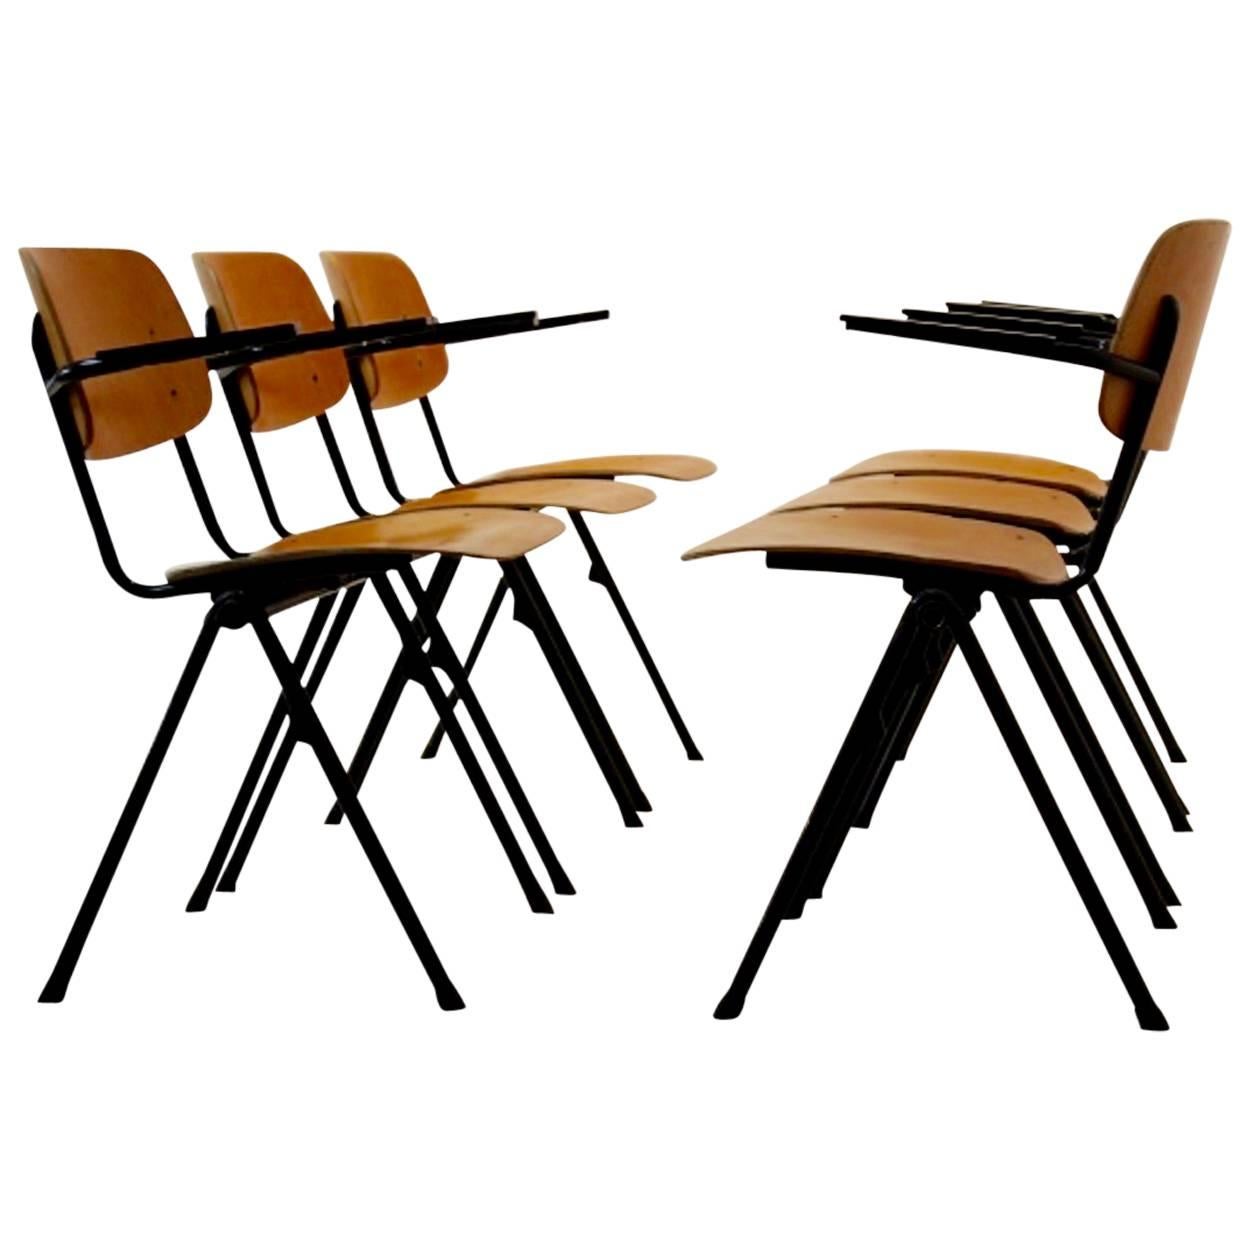 Industrial Plywood Marko School Chairs, Netherlands, 1960s For Sale